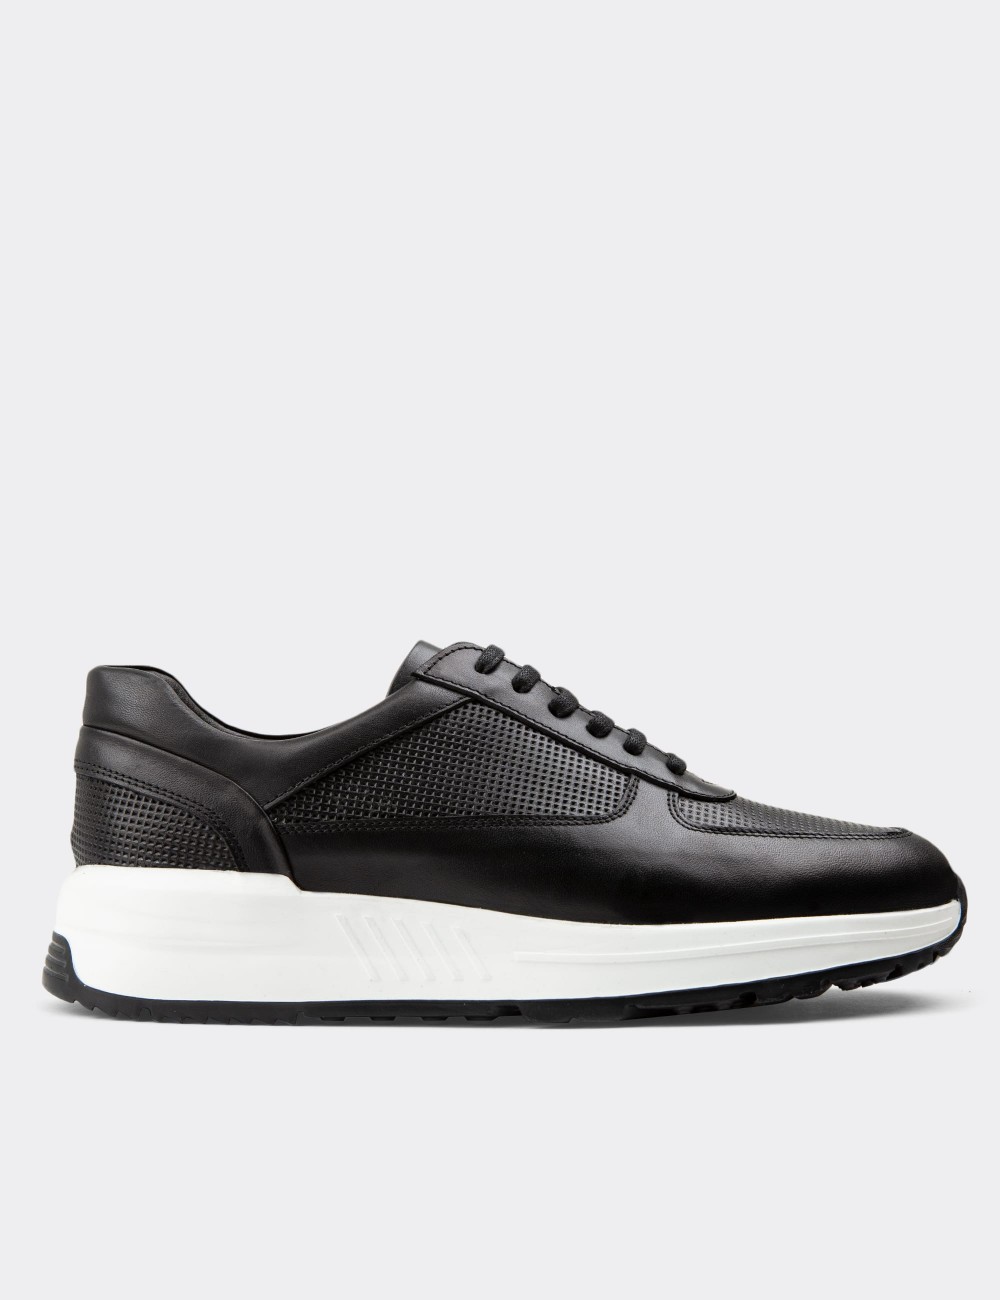 Black Leather Sneakers - 01887MSYHE01